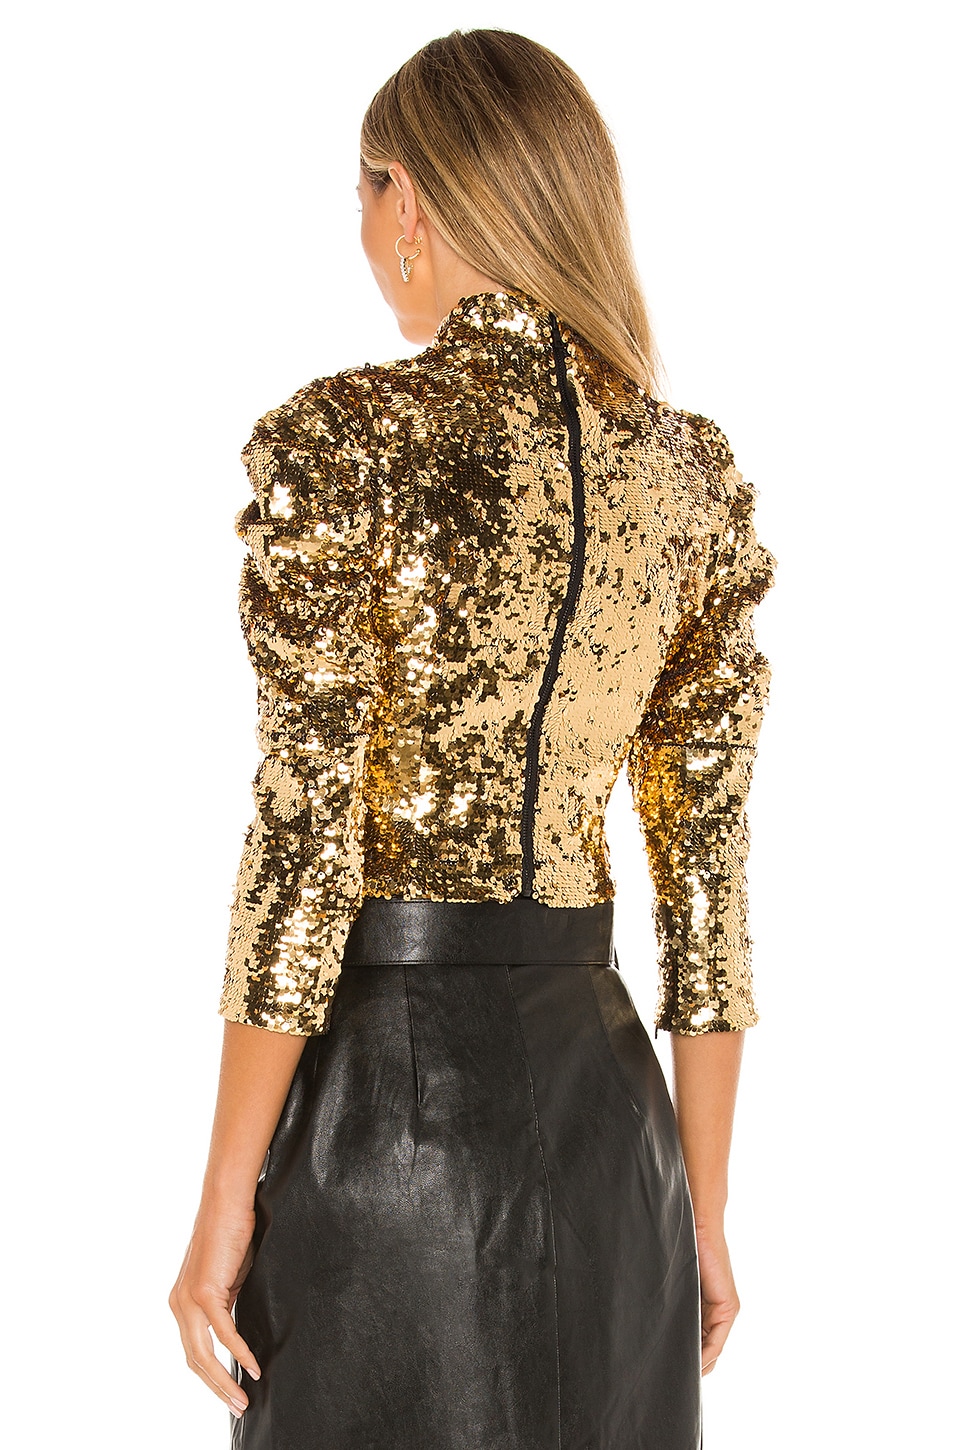 Alice + Olivia Brenna Sequin Puff Sleeve Top in Gold | REVOLVE